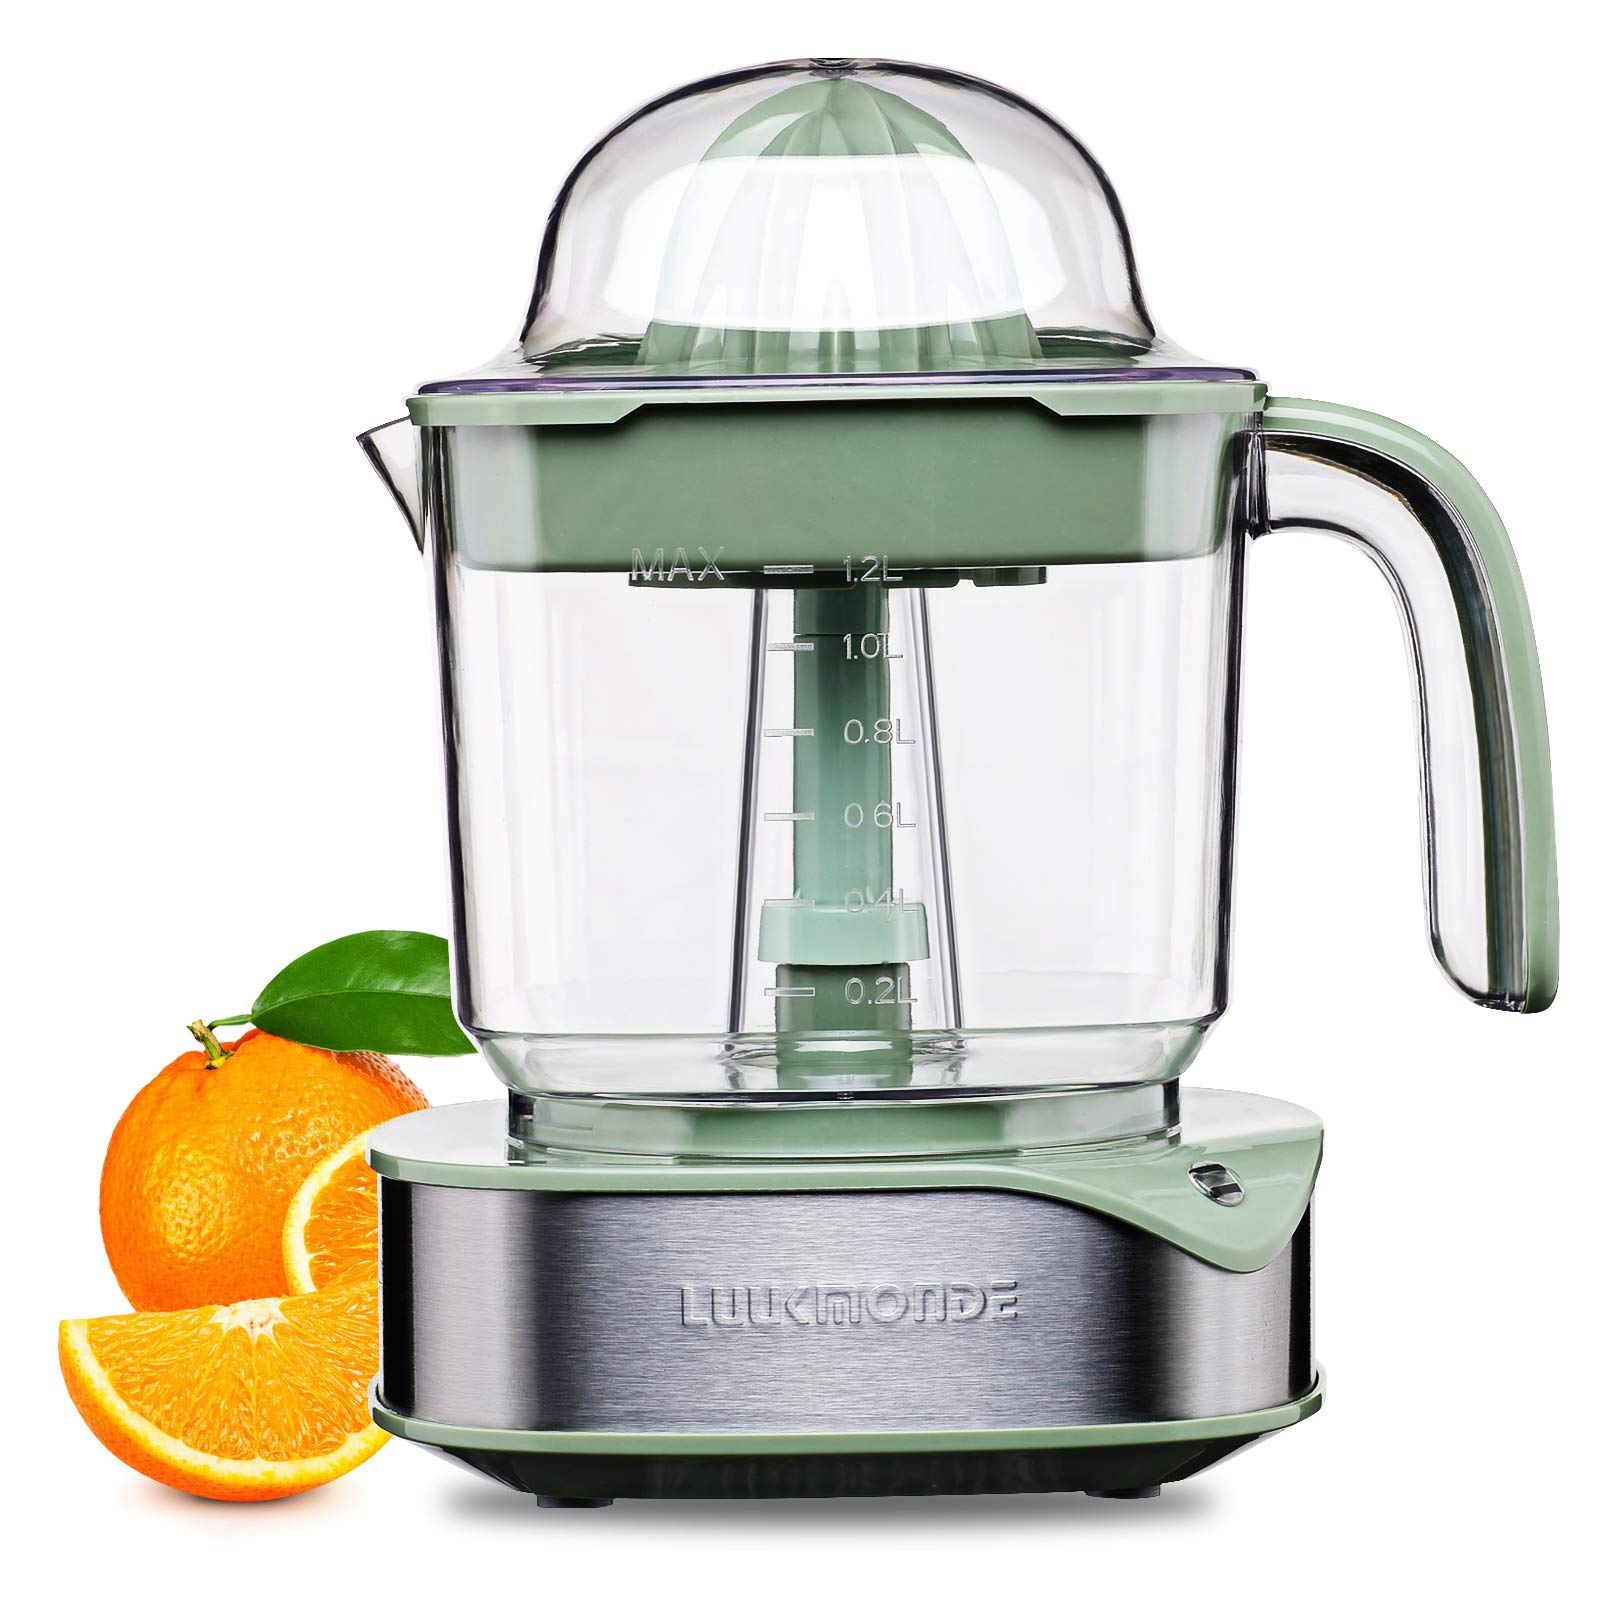 LUUKMONDE Electric citrus Juicer 12L Large Volume - Orange Juicer with Powerful Motor and LED Working Lamp - Lemon Squeezer Electric for O